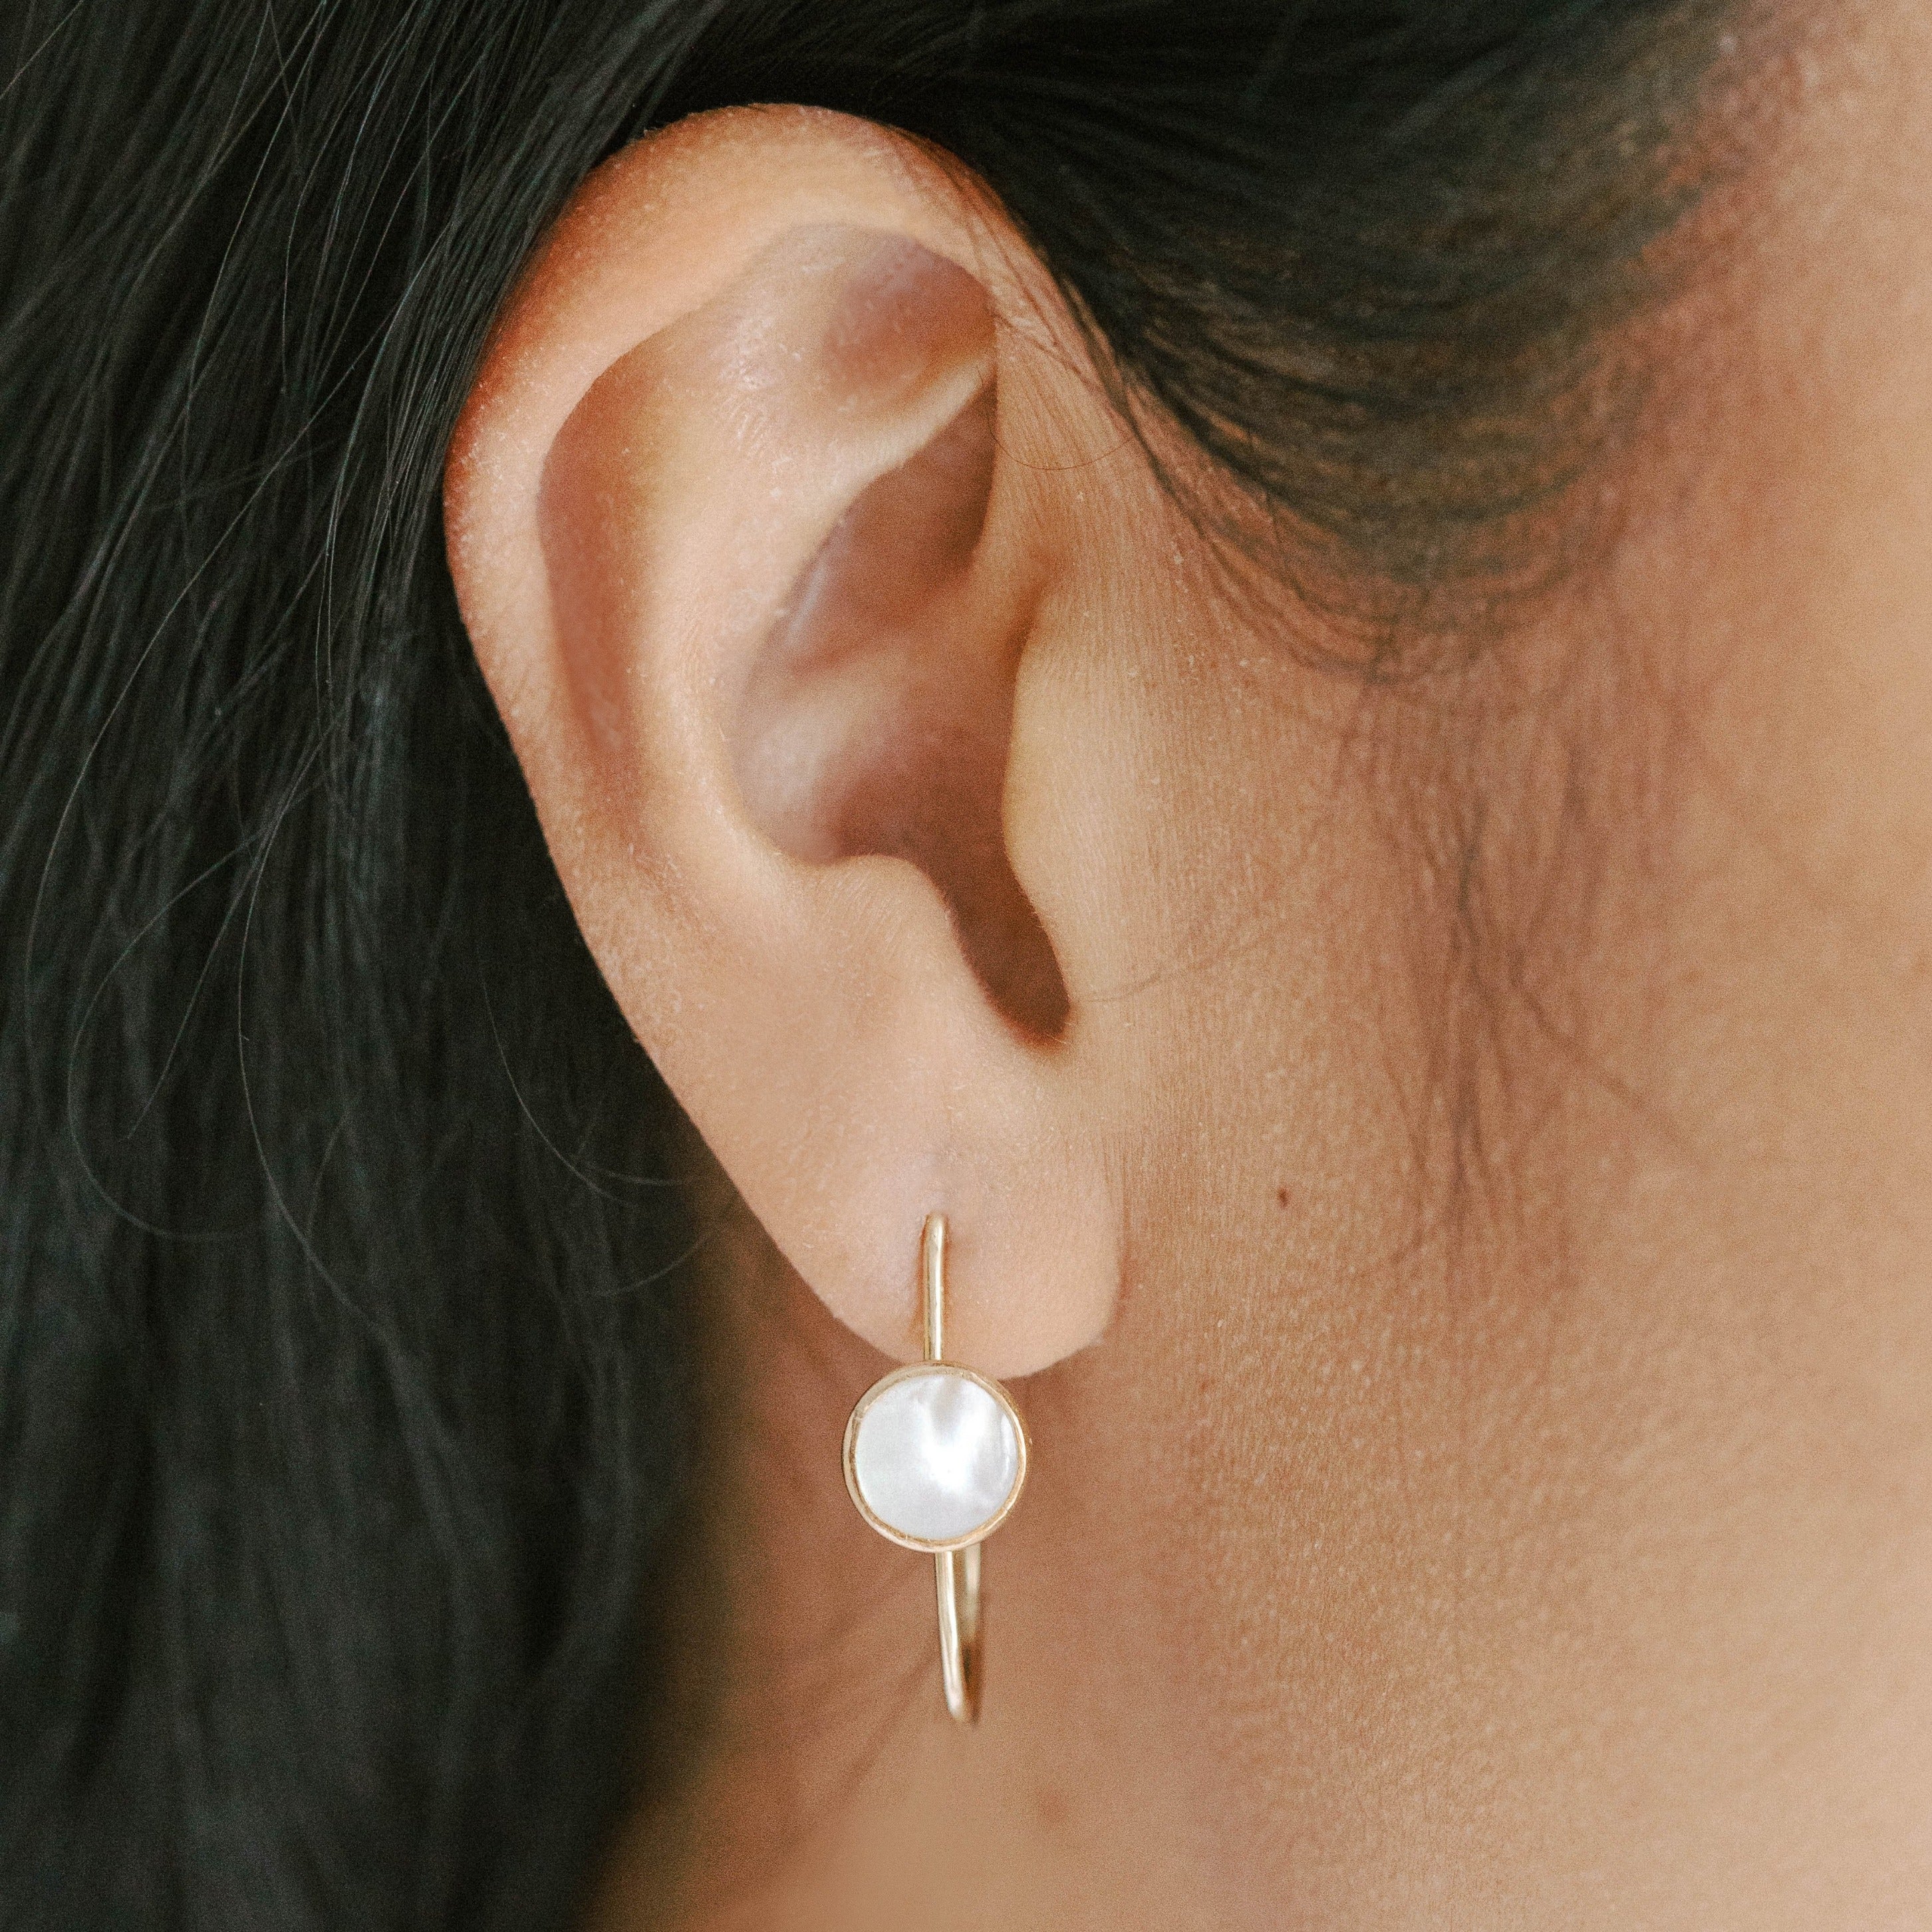 Lightweight gold hoop earrings with pearls. Mother of pearl design that is modern.